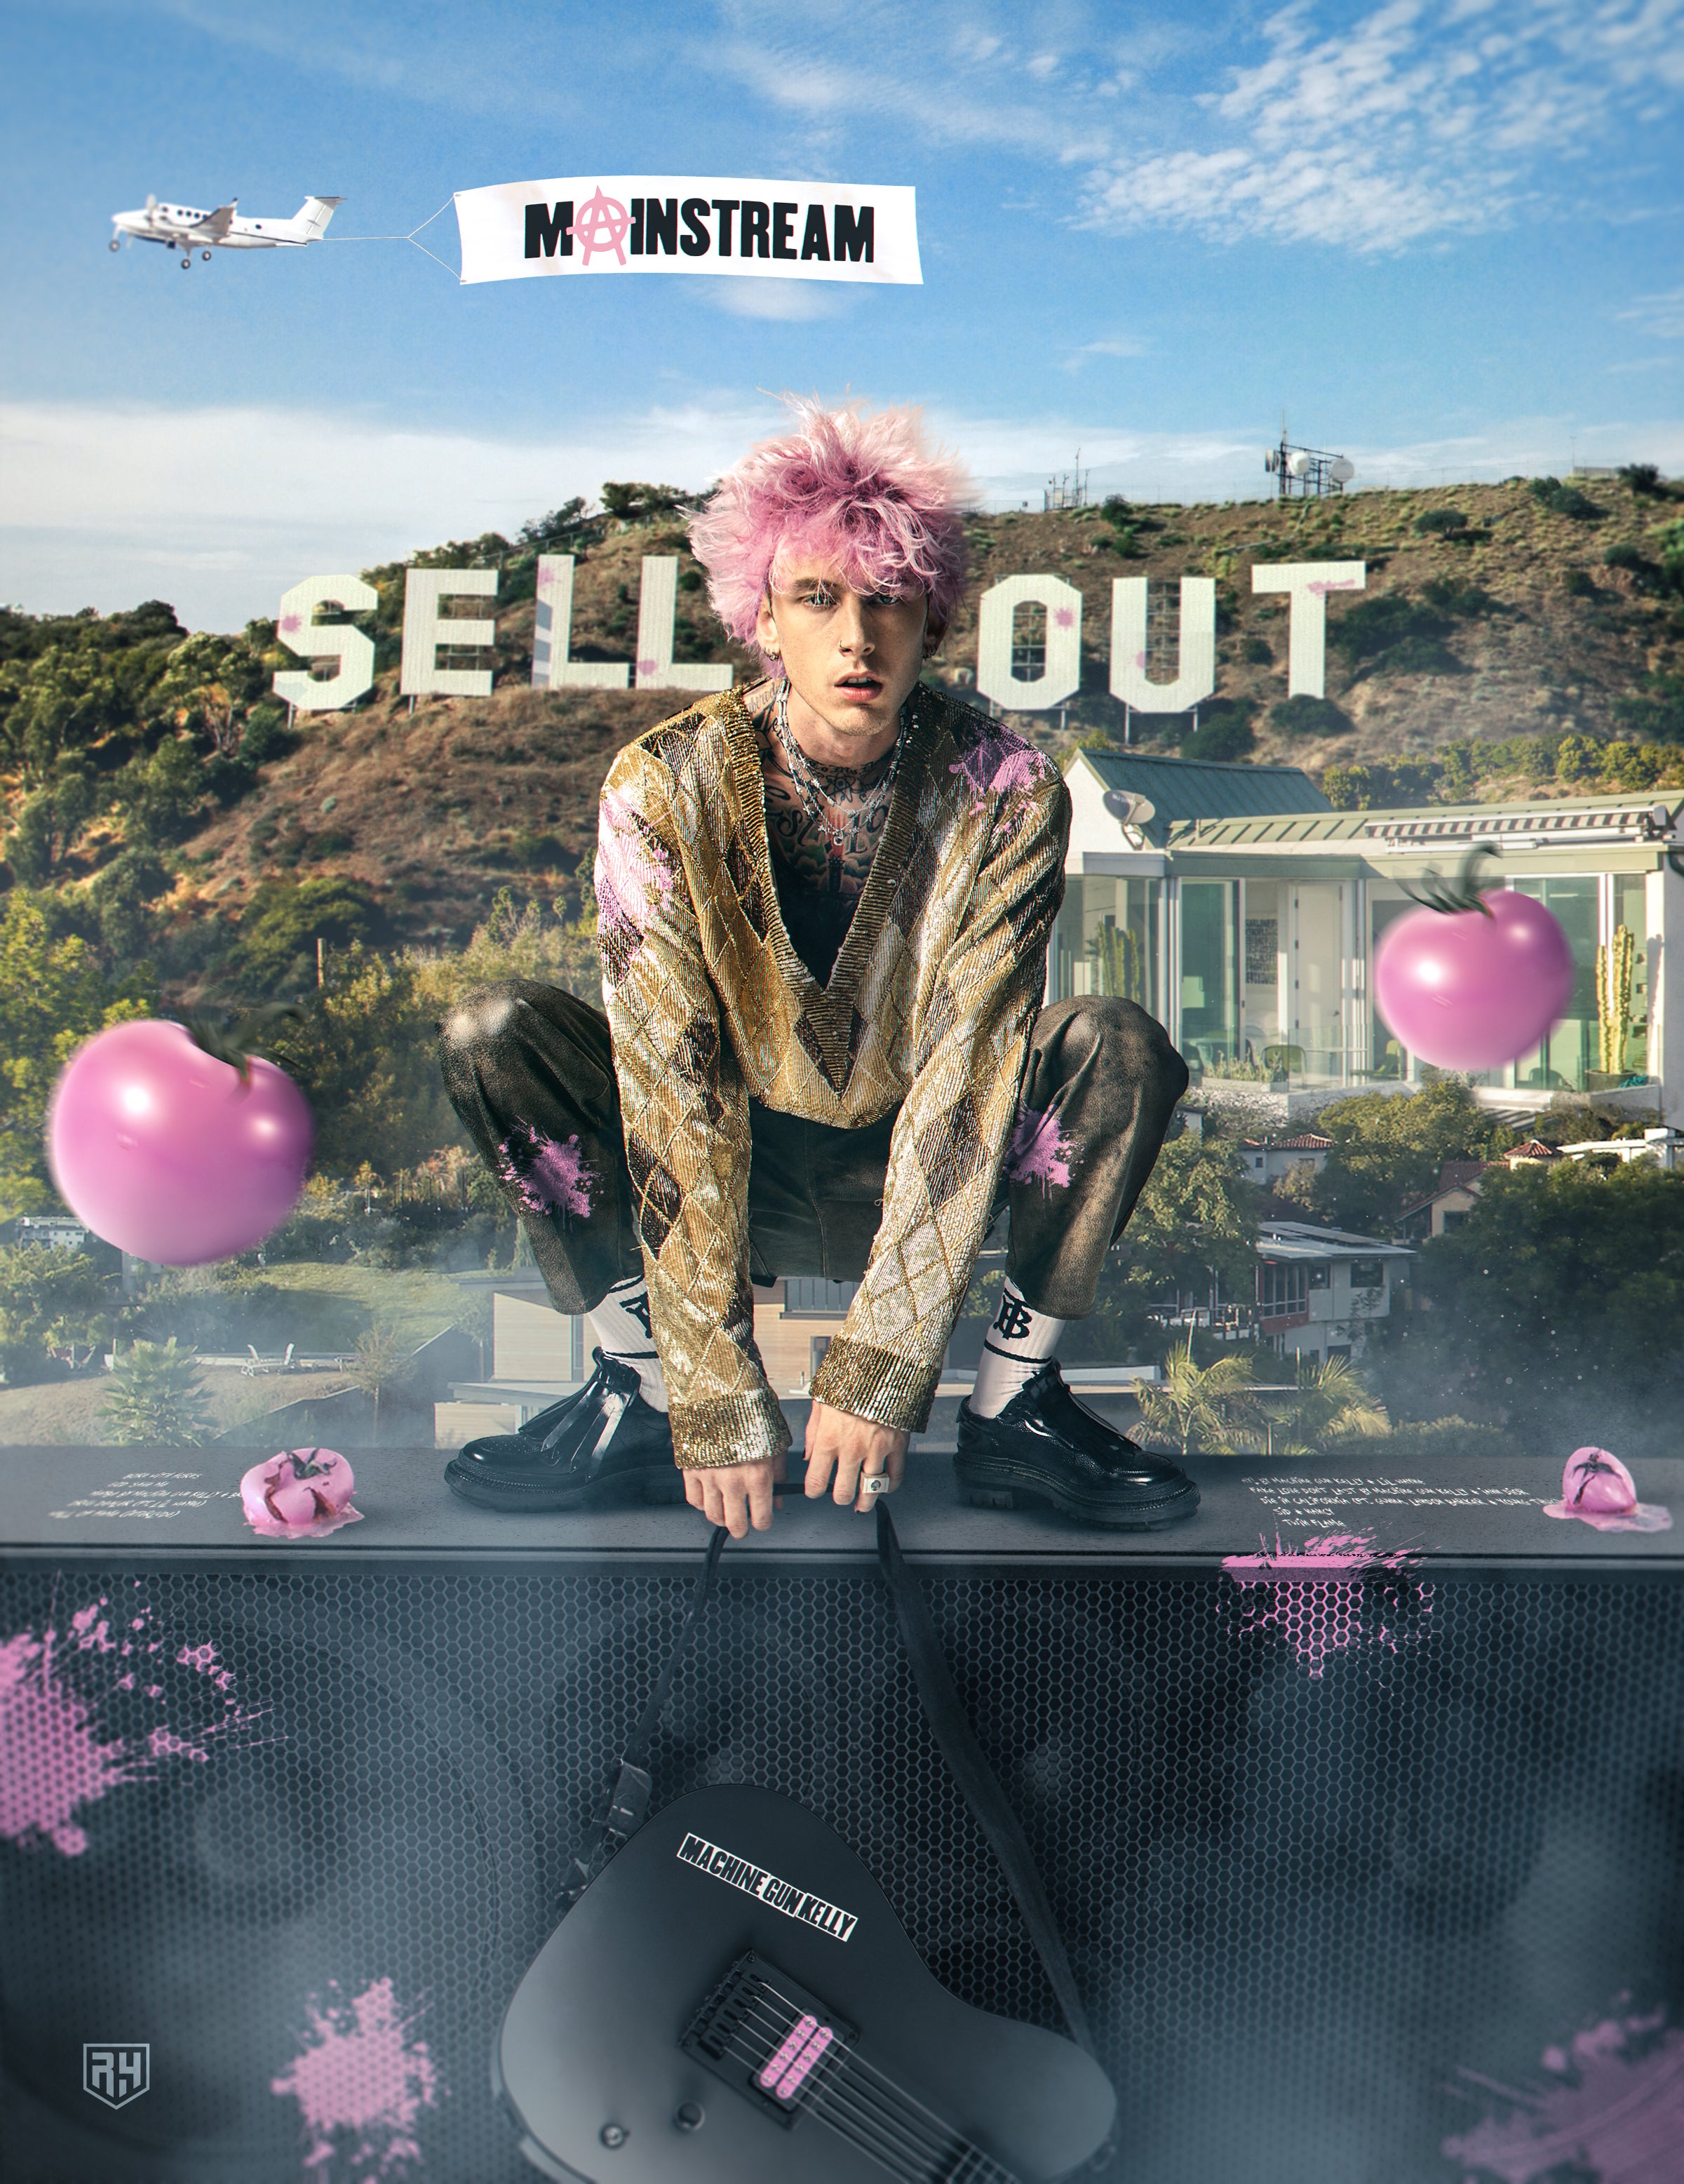 I made a poster design for Mainstream Sellout, it would mean the world to me if he saw this, if you guys could please him on my Instagram page I